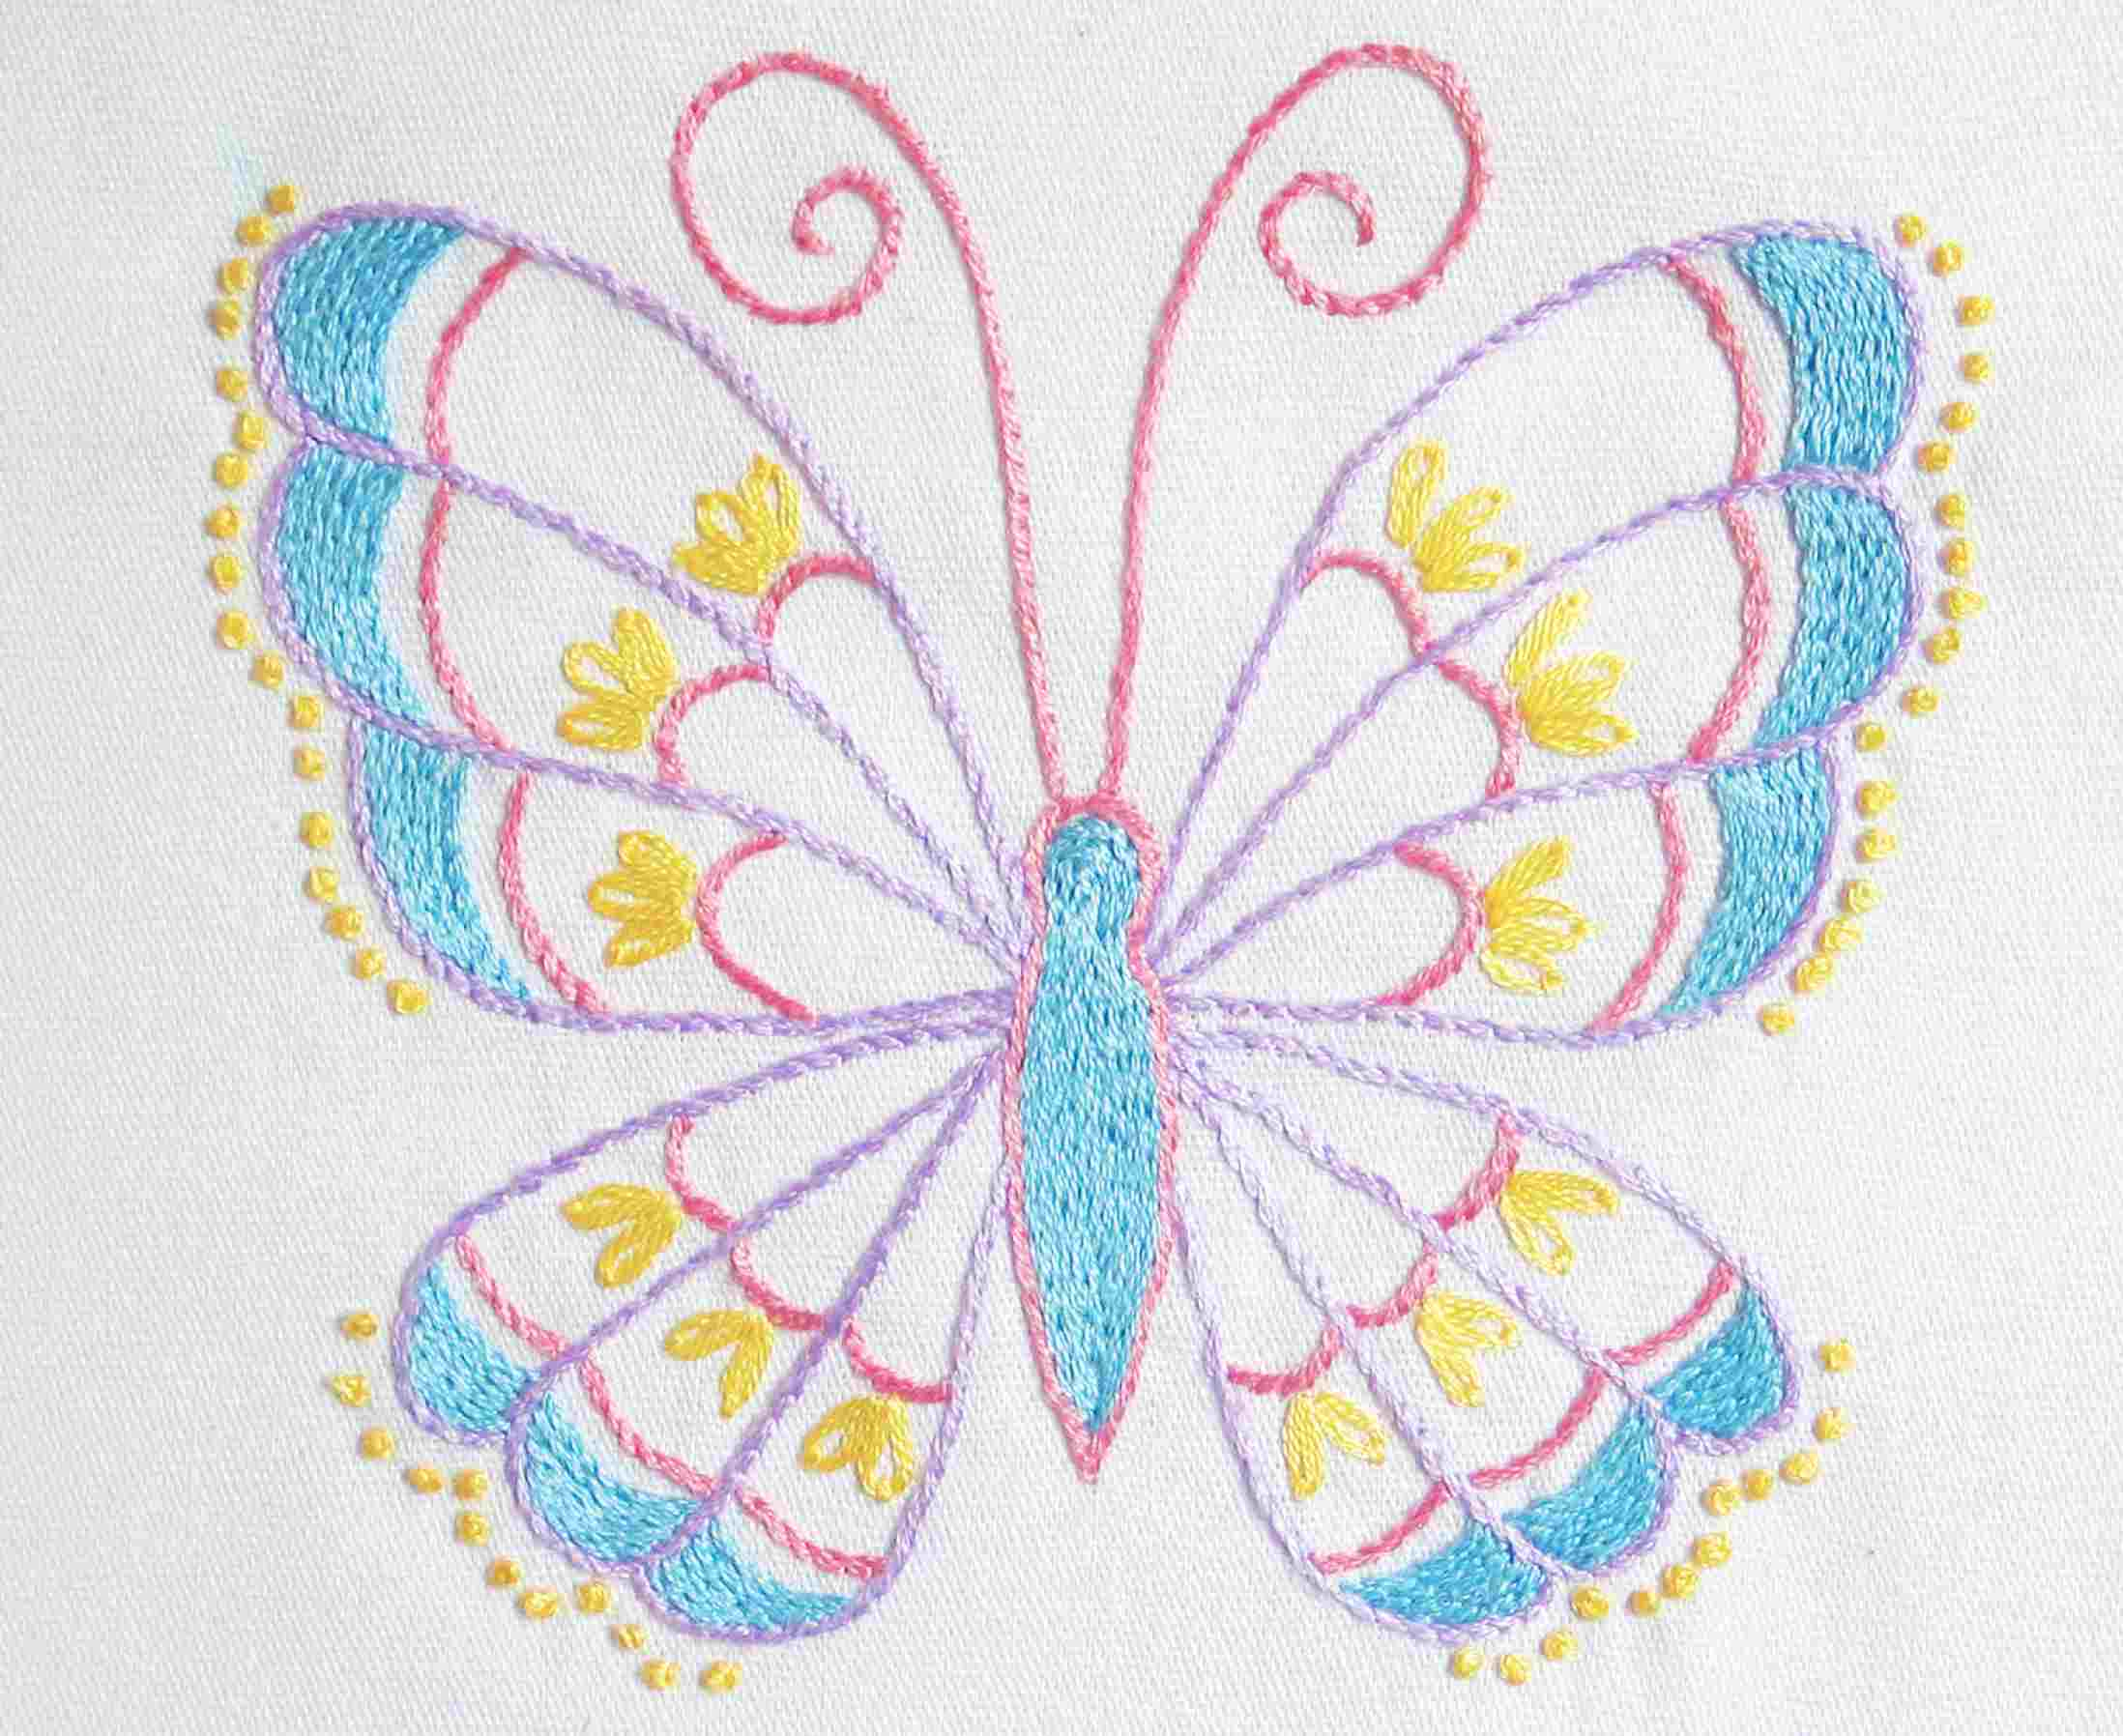 Hand Stitch Embroidery Patterns Our Top 25 Free Embroidery Designs